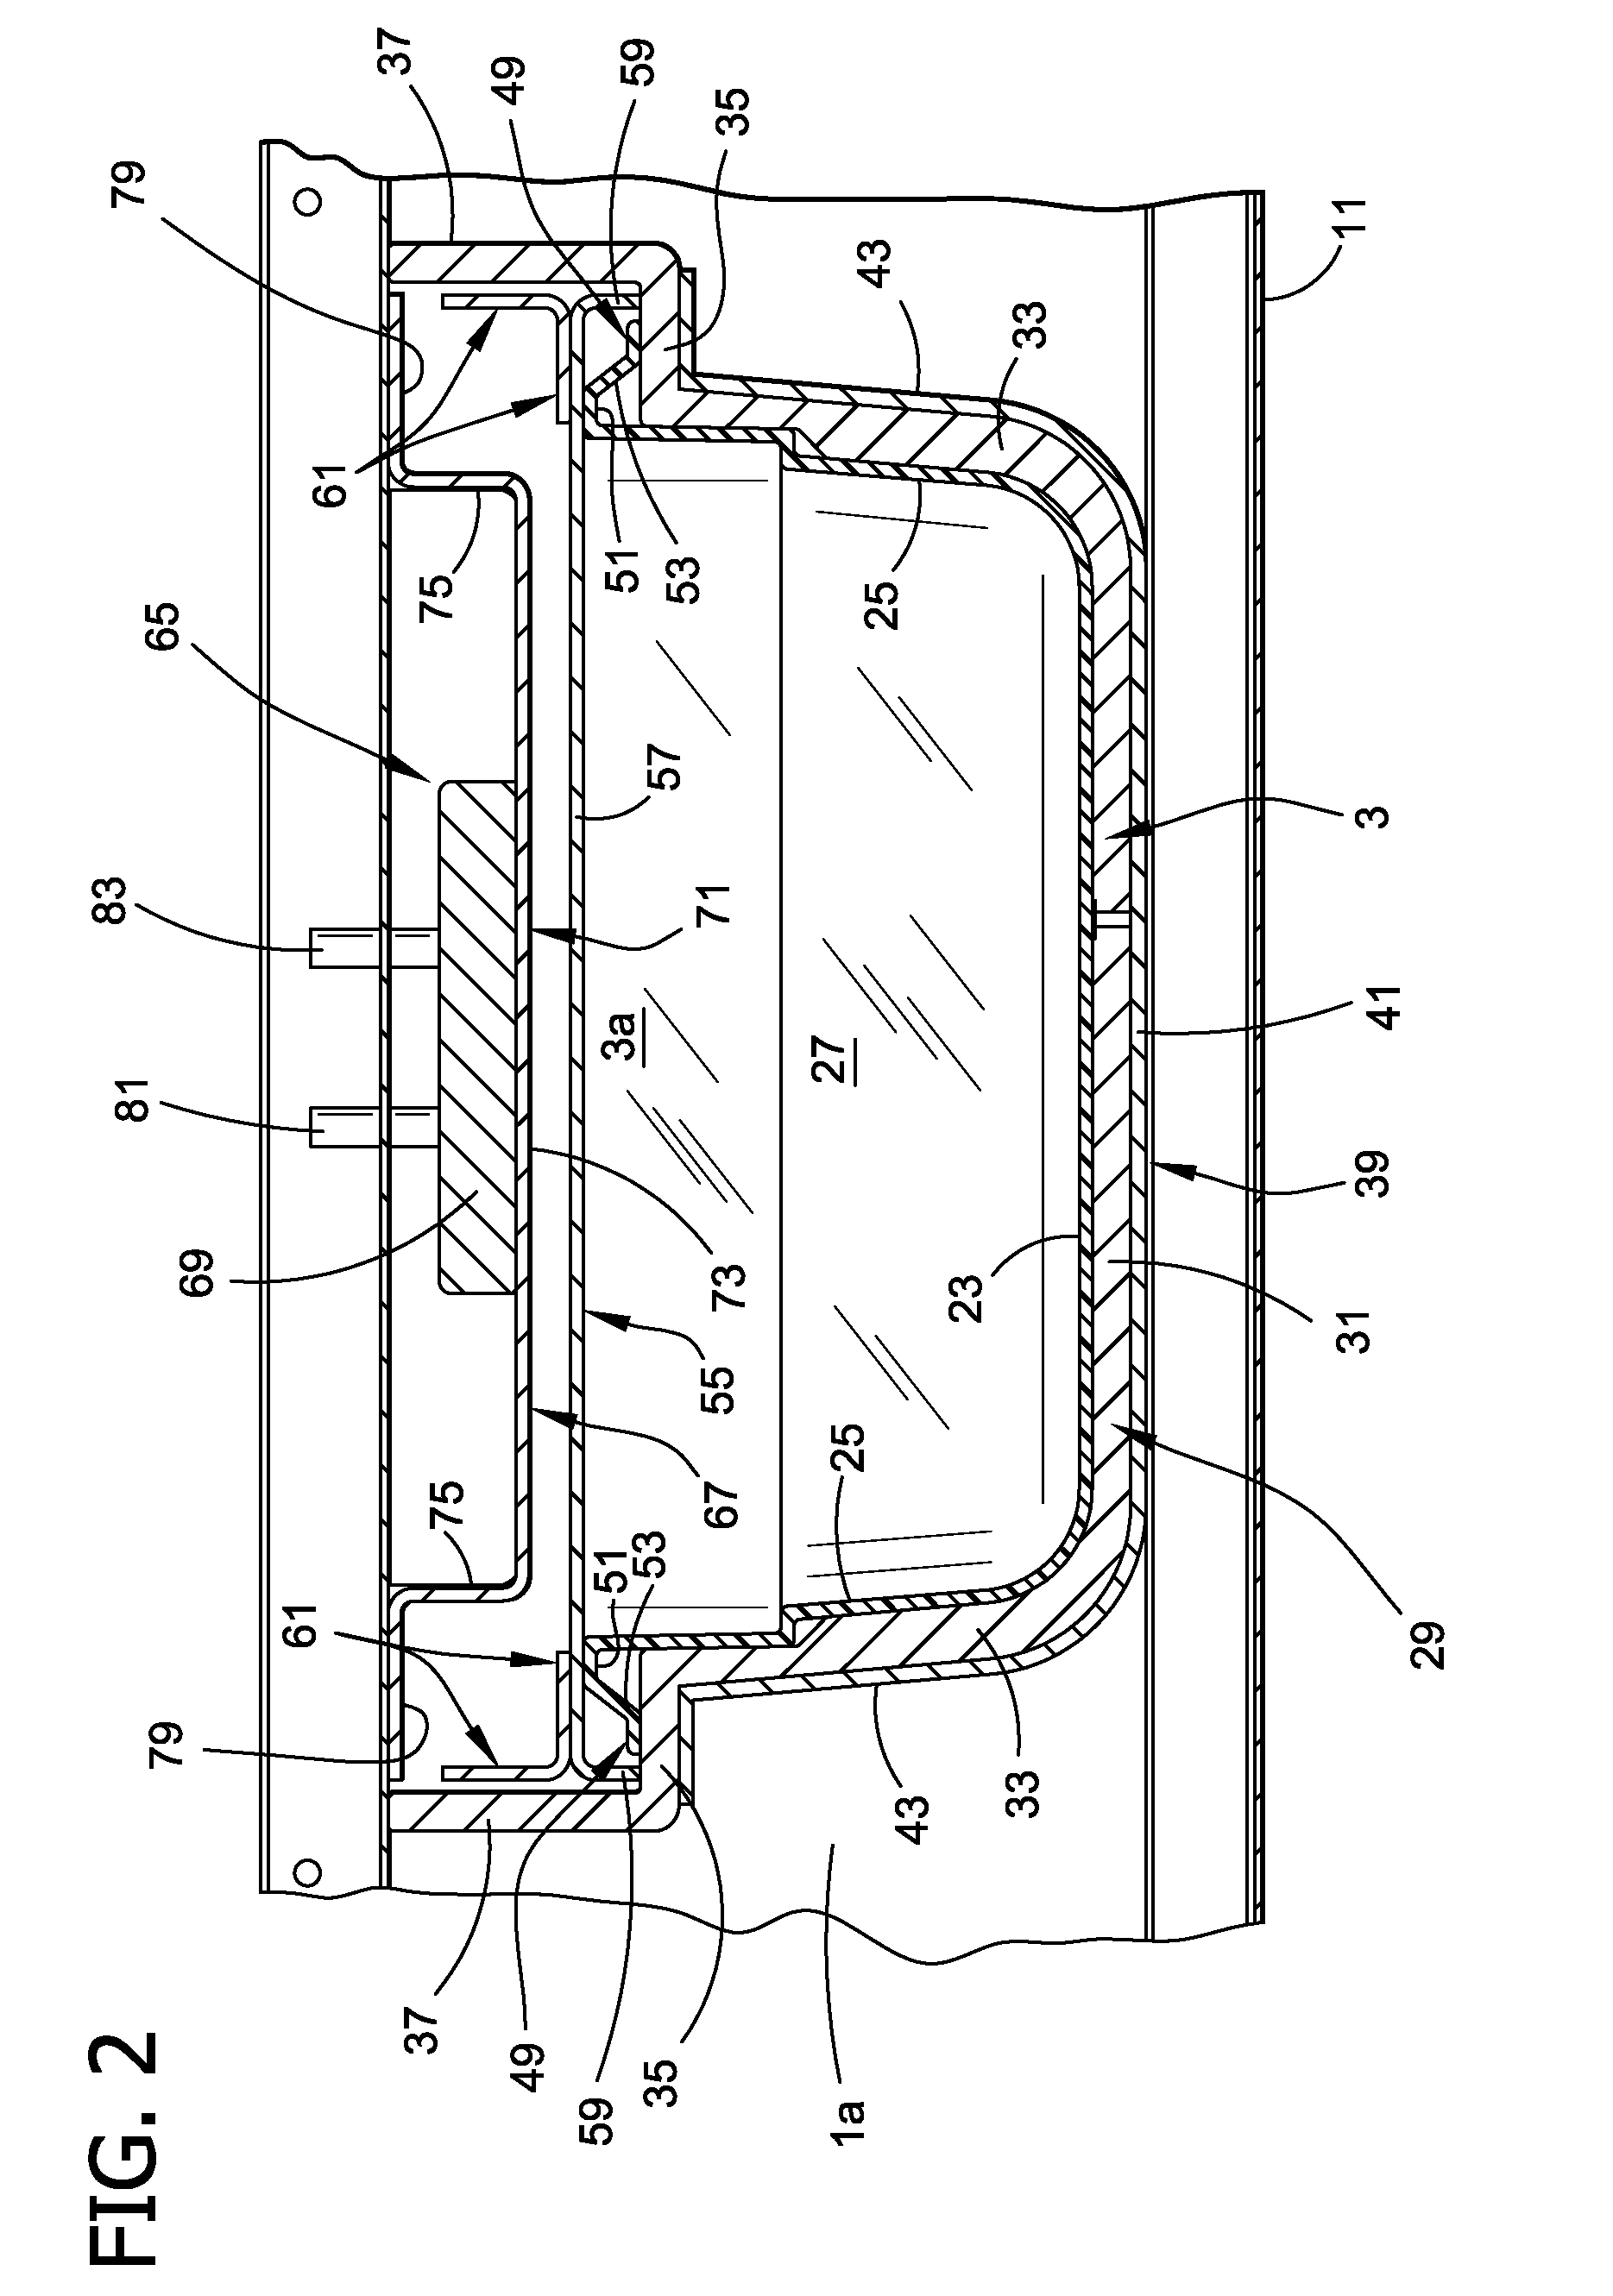 Food service apparatus and methods